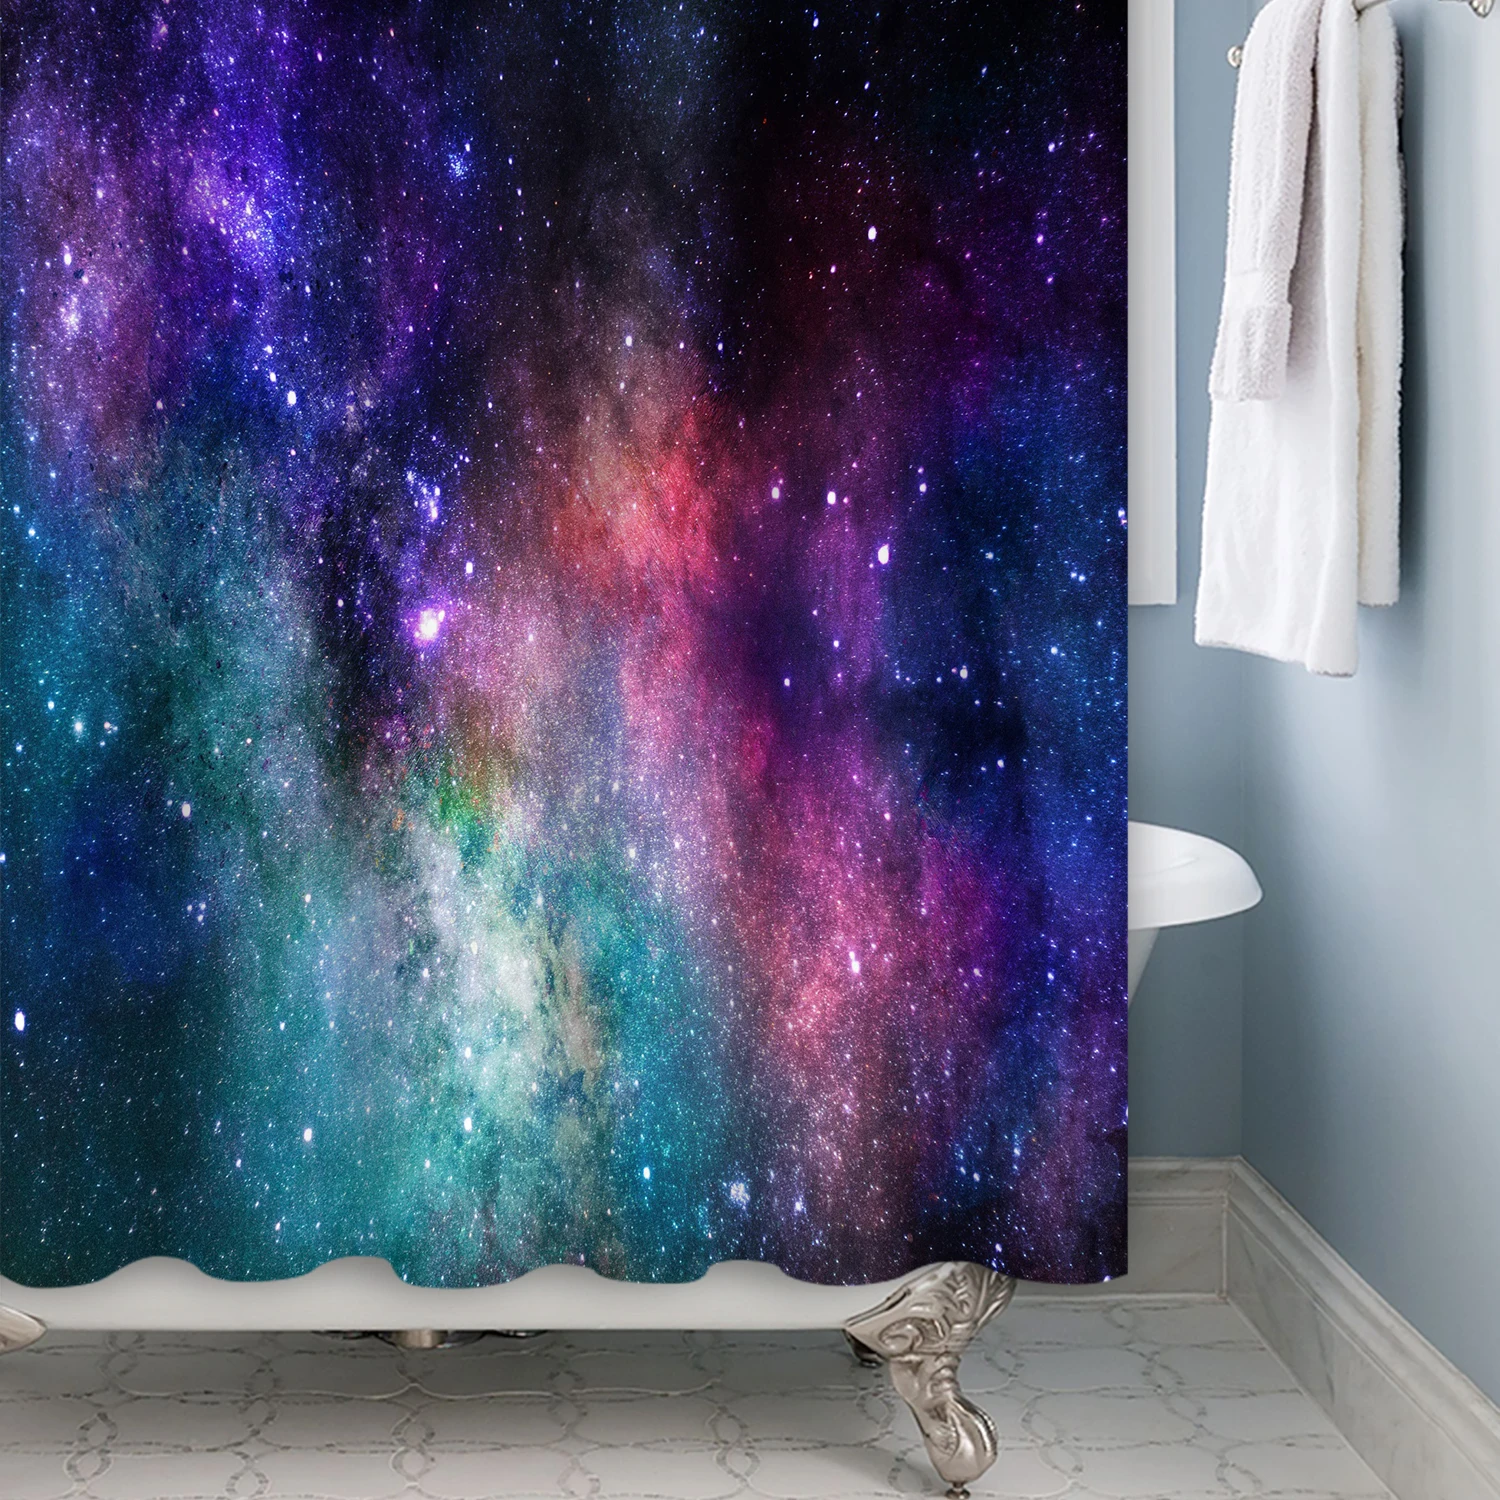 

Fabric Star Outer Space Shower Curtain Bathroom Starry Galaxy Bathtub Set Universe Planet Accessories Decors Panel Waterproof